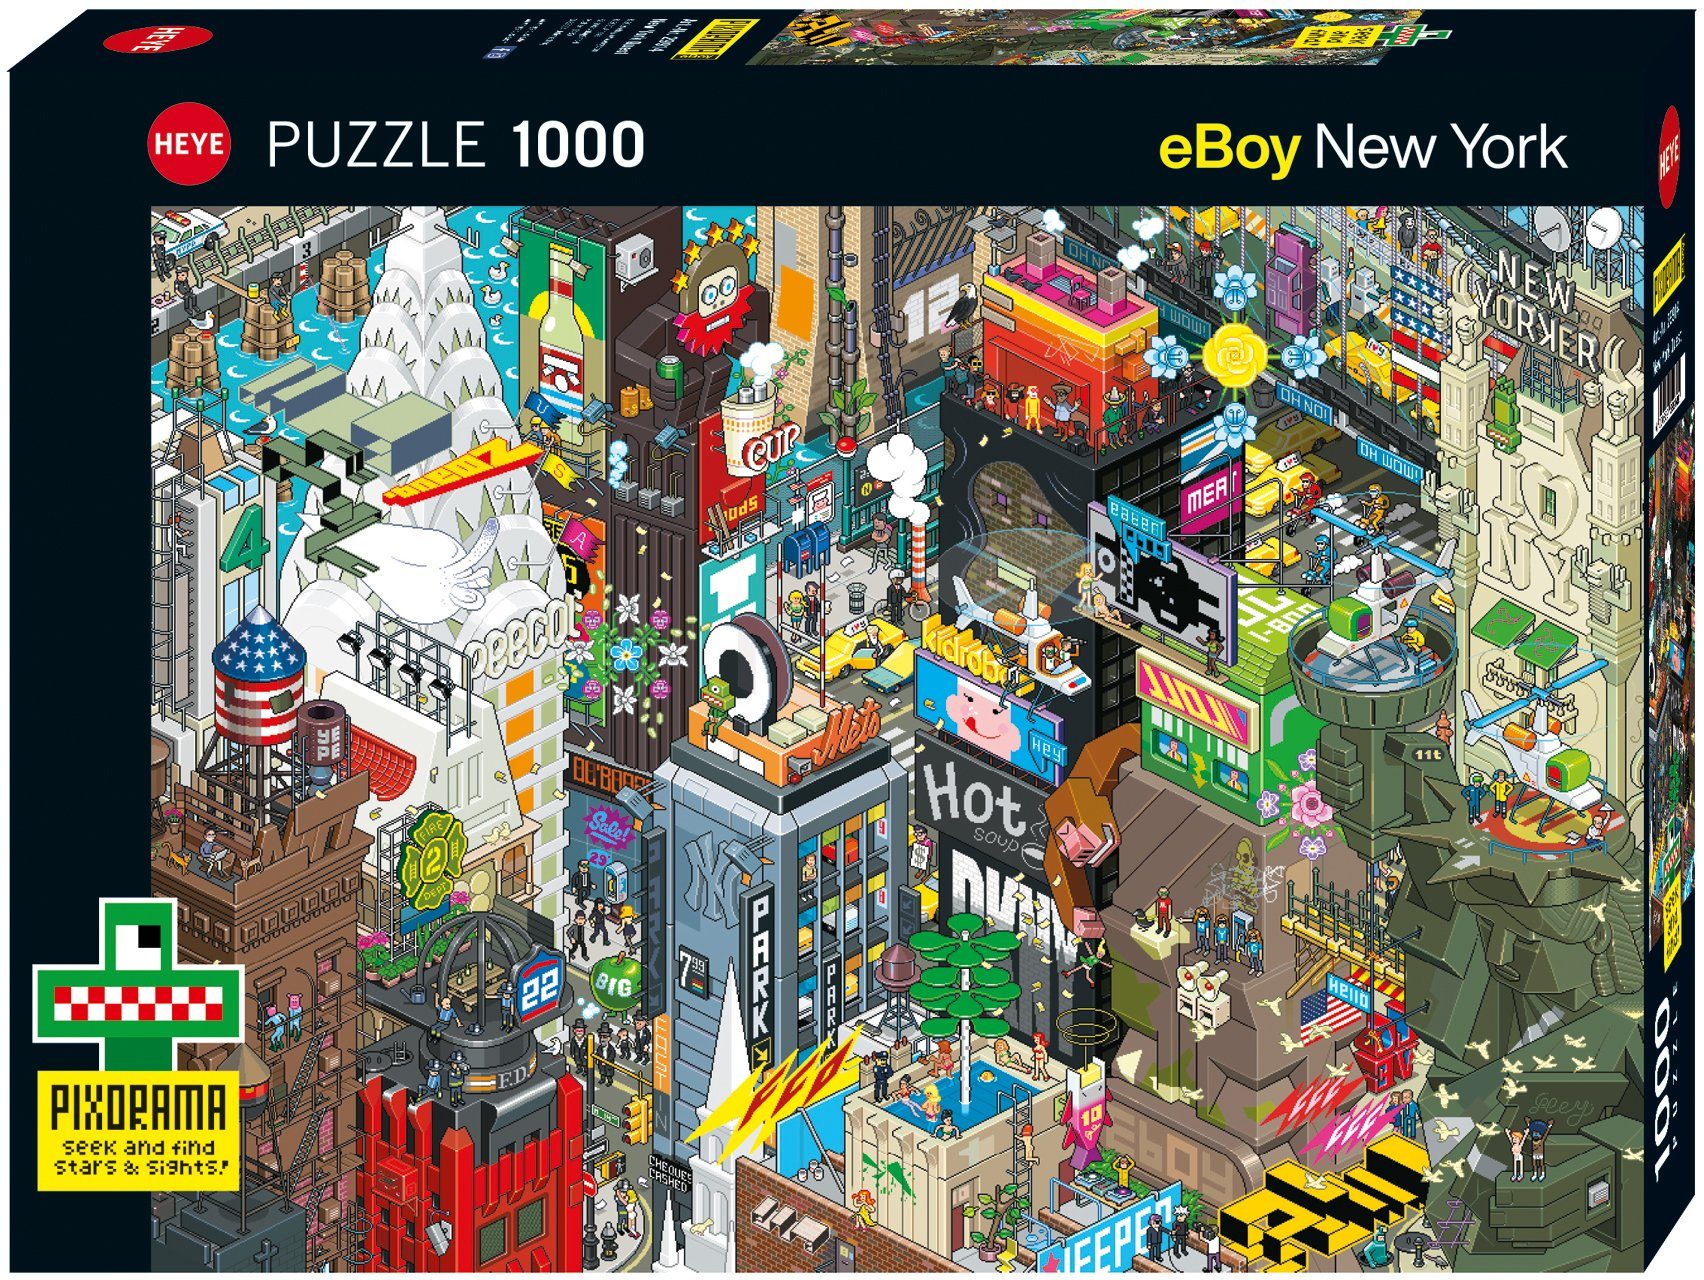 HEYE Puzzle New York Quest, 1000 Puzzleteile, Made in Germany